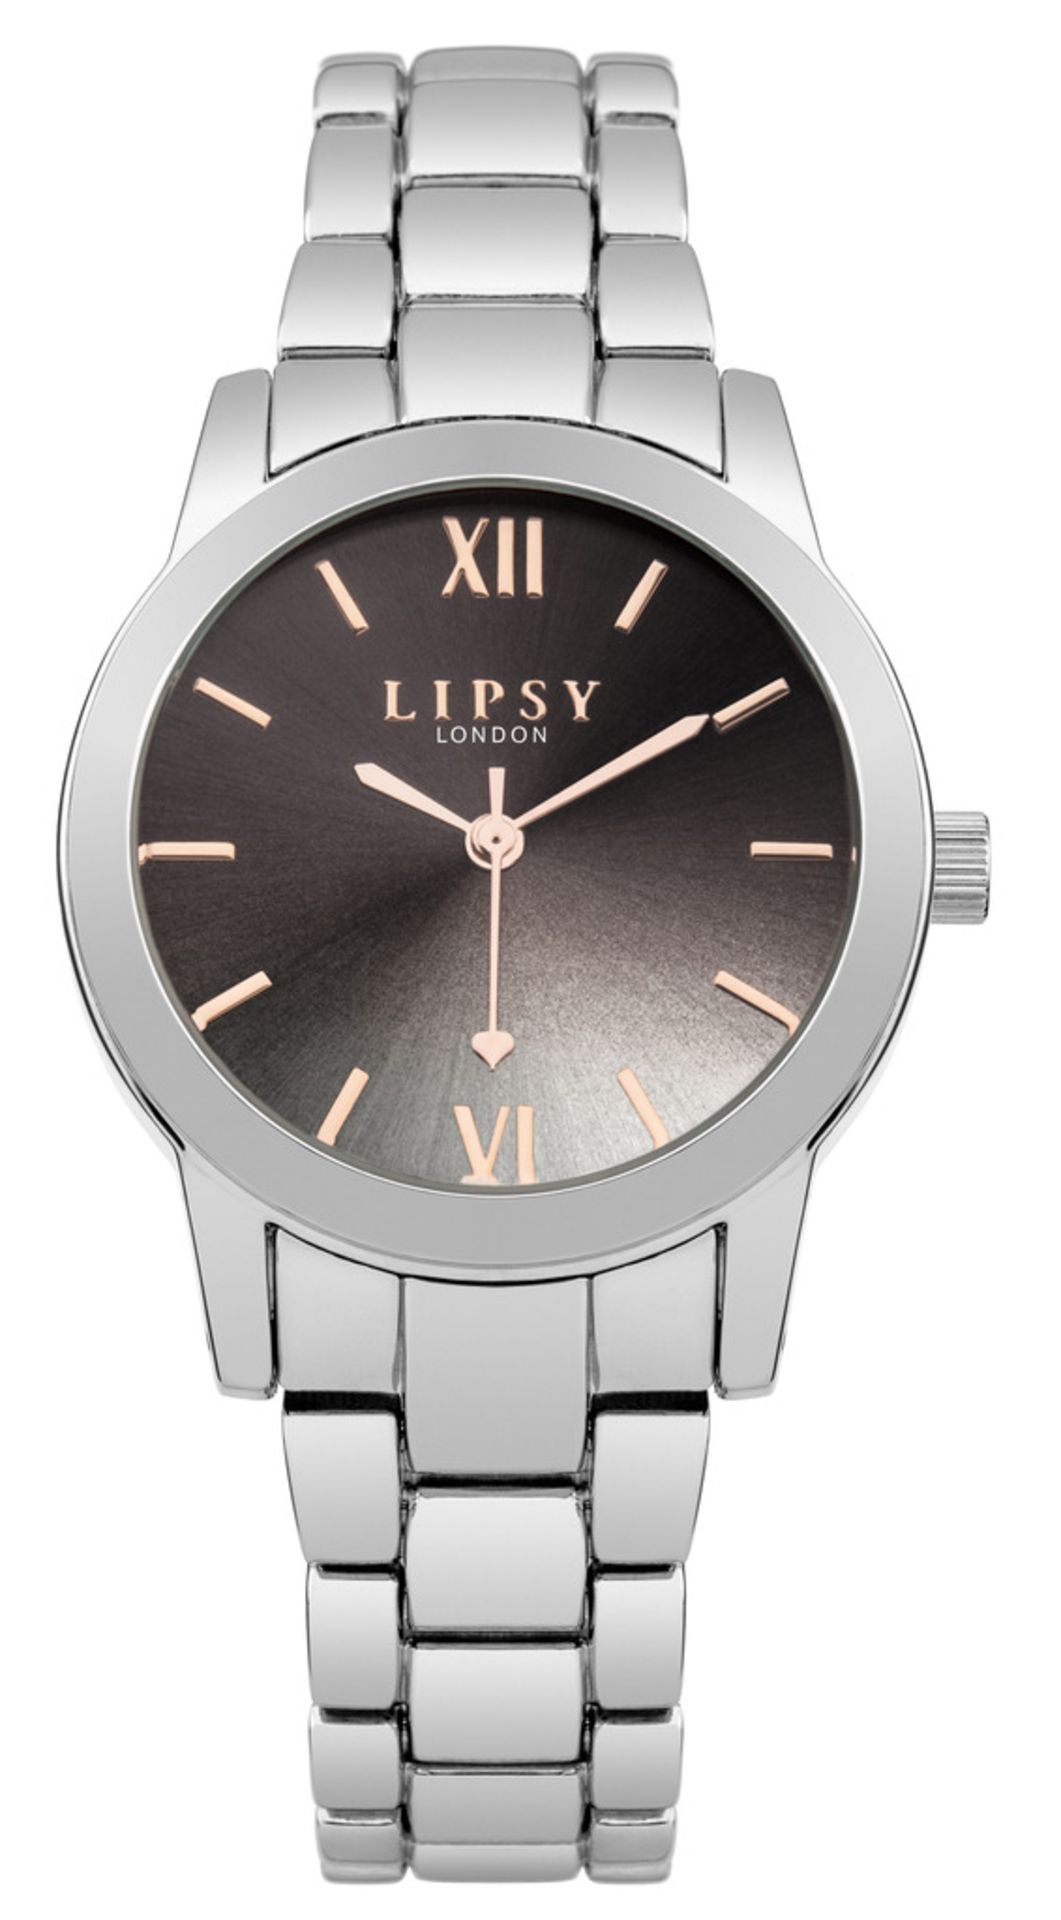 Lipsy Ladies' Watch New & Mint Condition